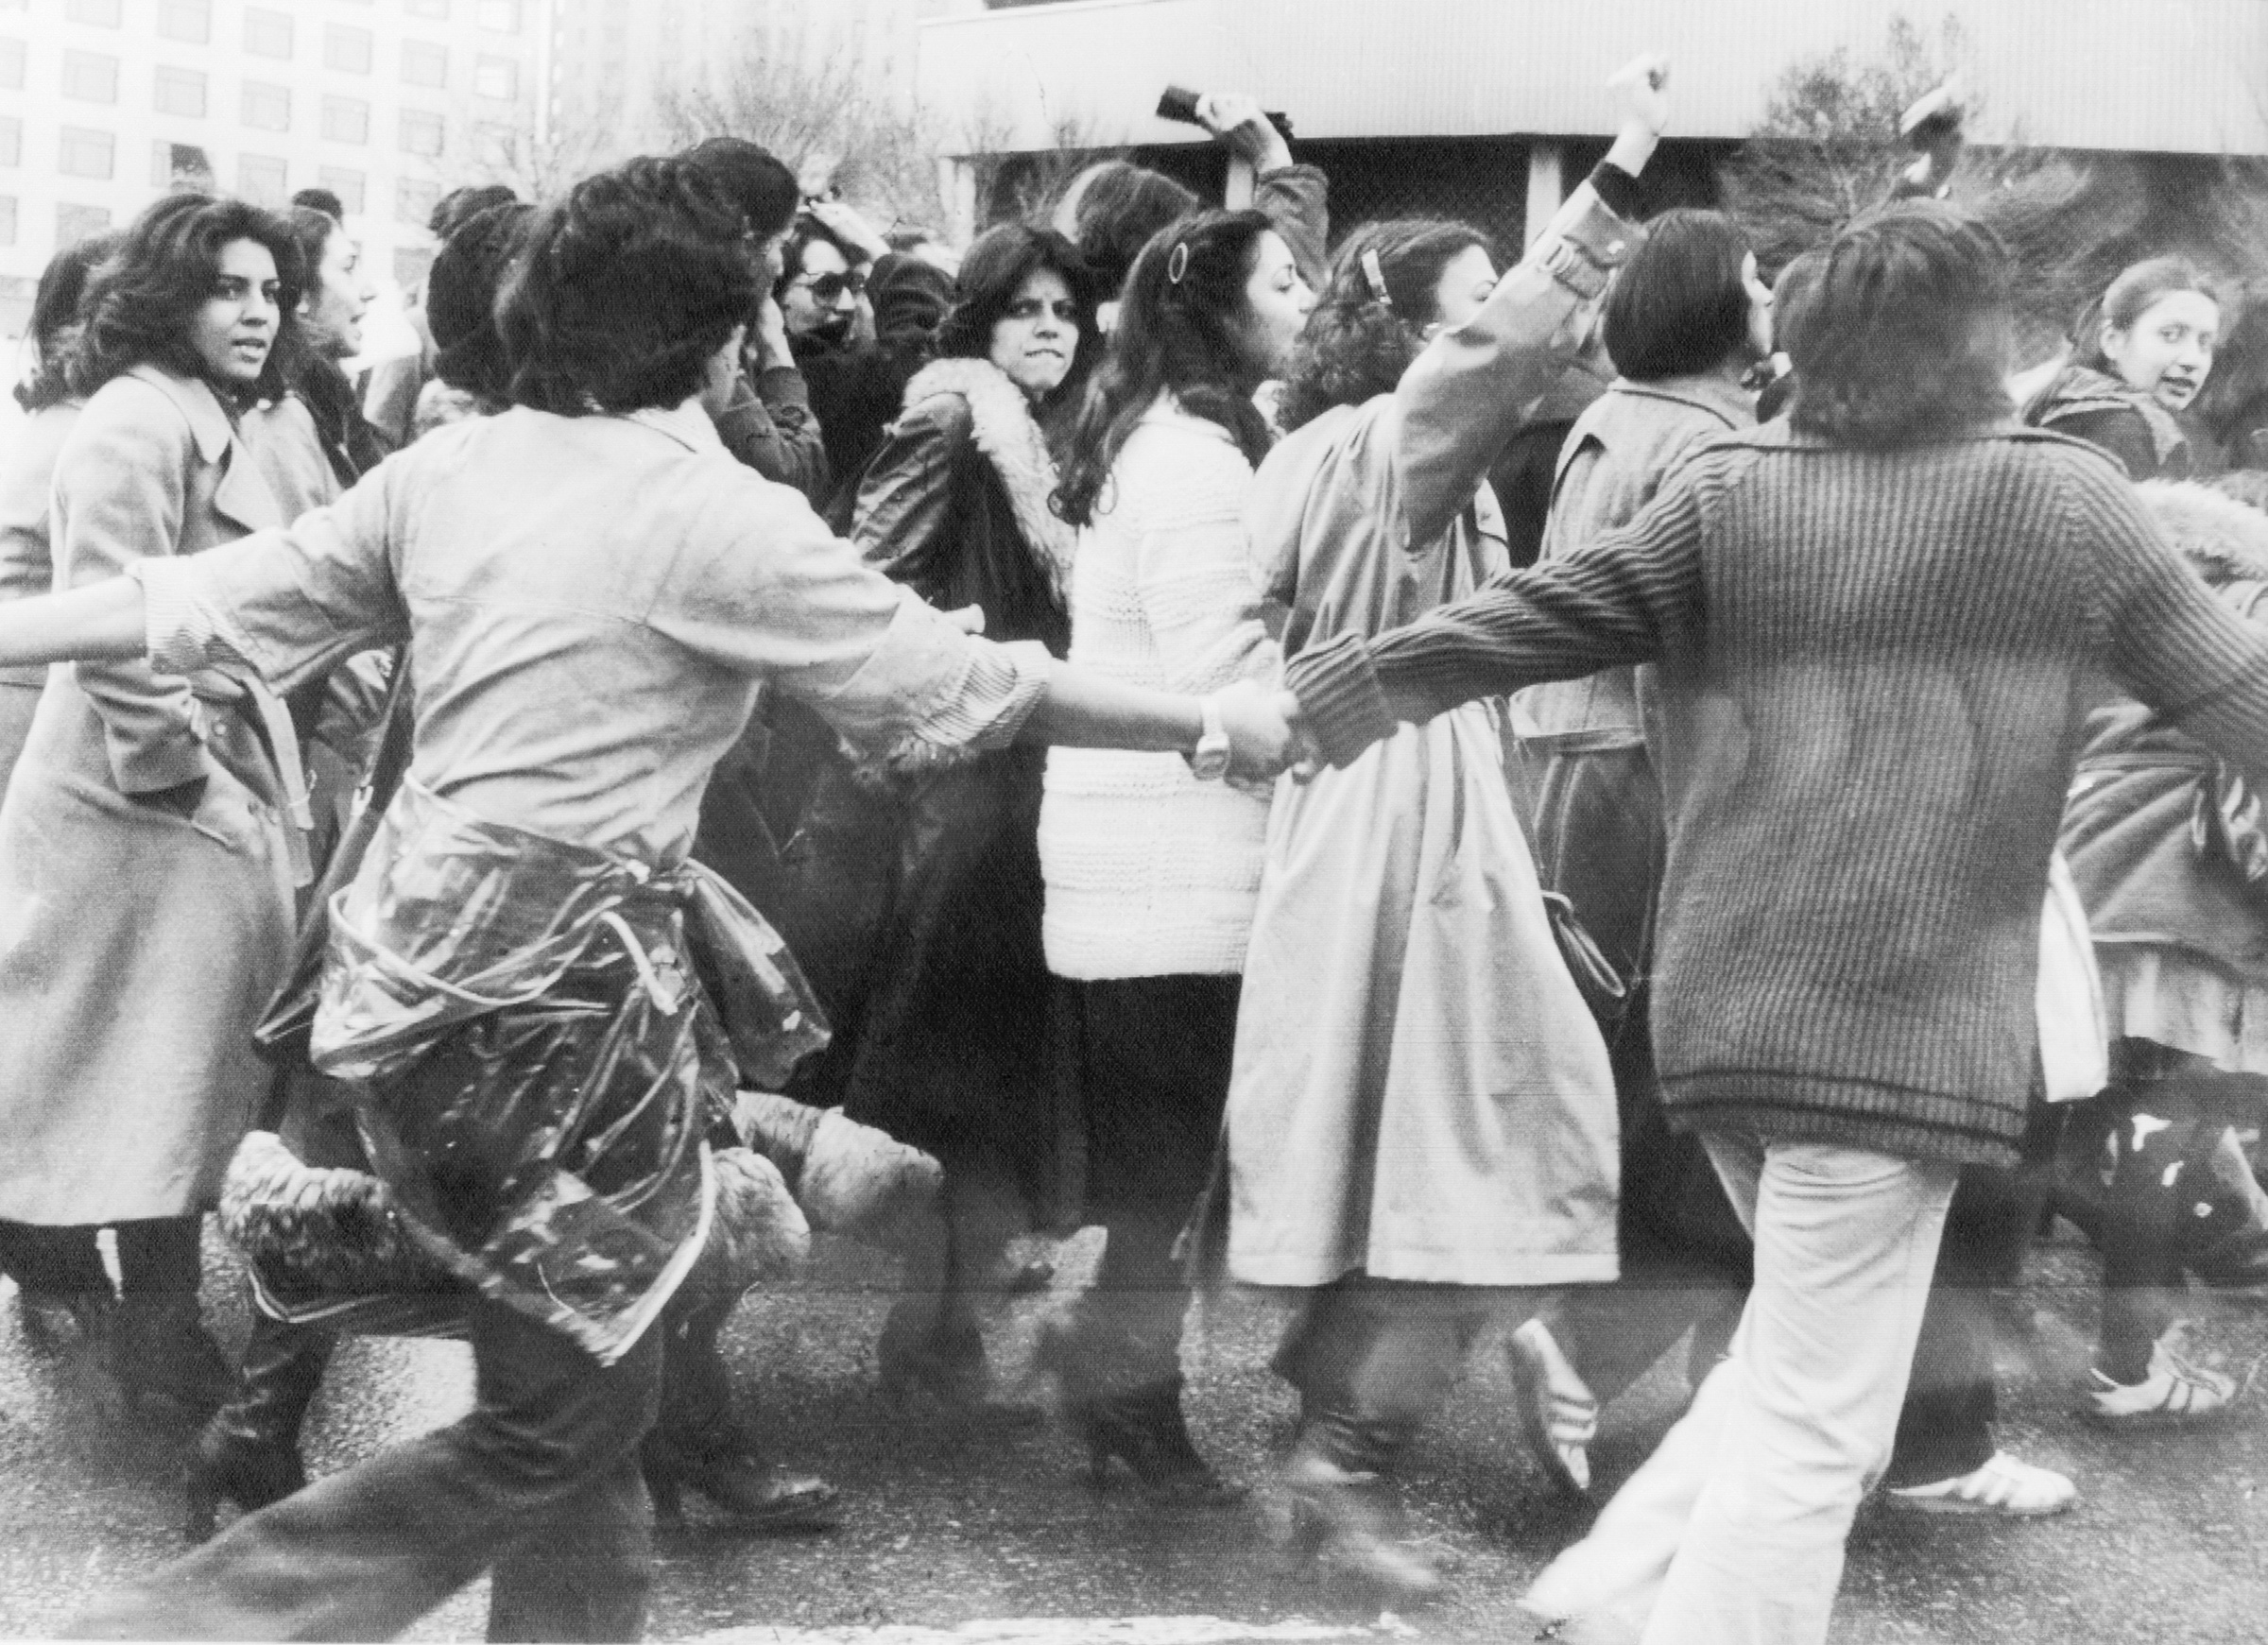 Women protestors, surrounded by men as a form of protection, march against the veil in Tehran, on March 10, 1979.